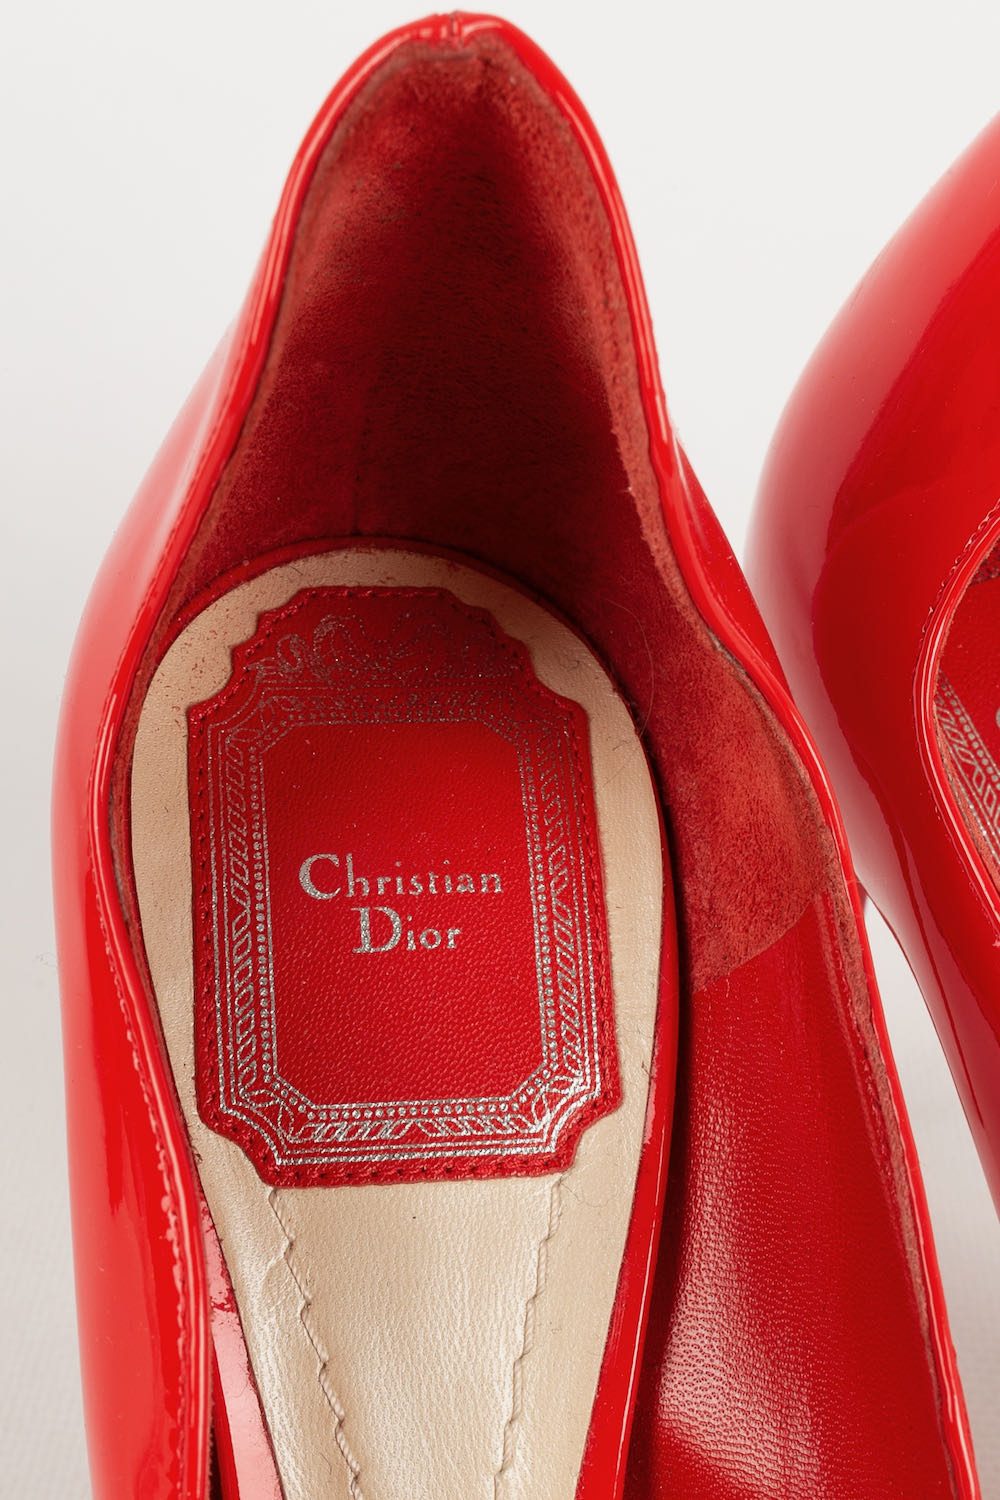 From Christian Dior to Alexander McQueen most iconic shoes in world  The  People Ahead and Behind